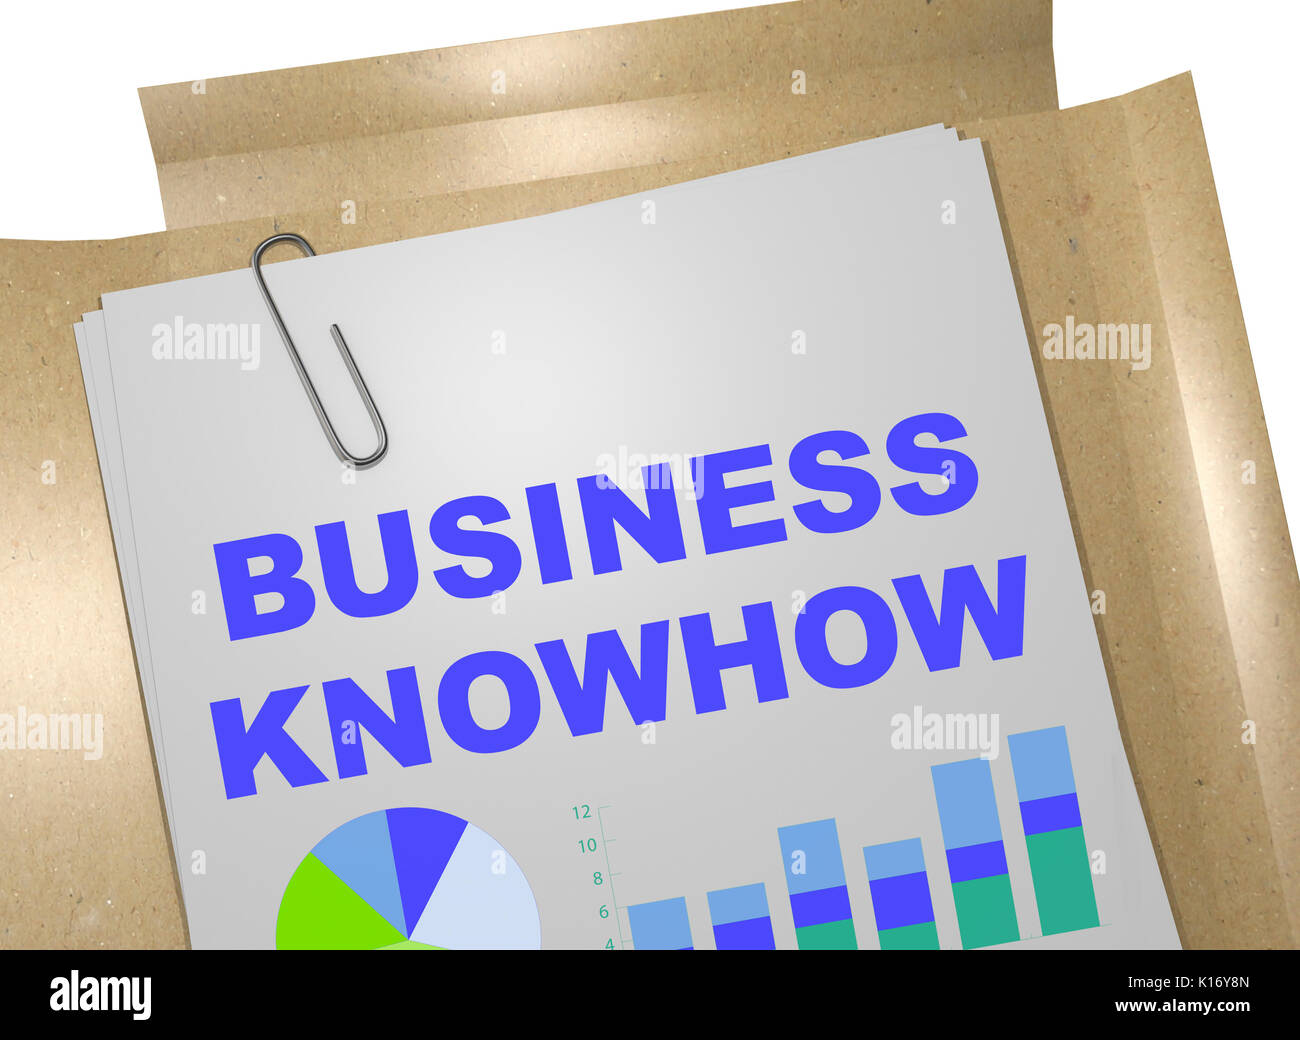 3D illustration of 'BUSINESS KNOWHOW' title on business document Stock Photo